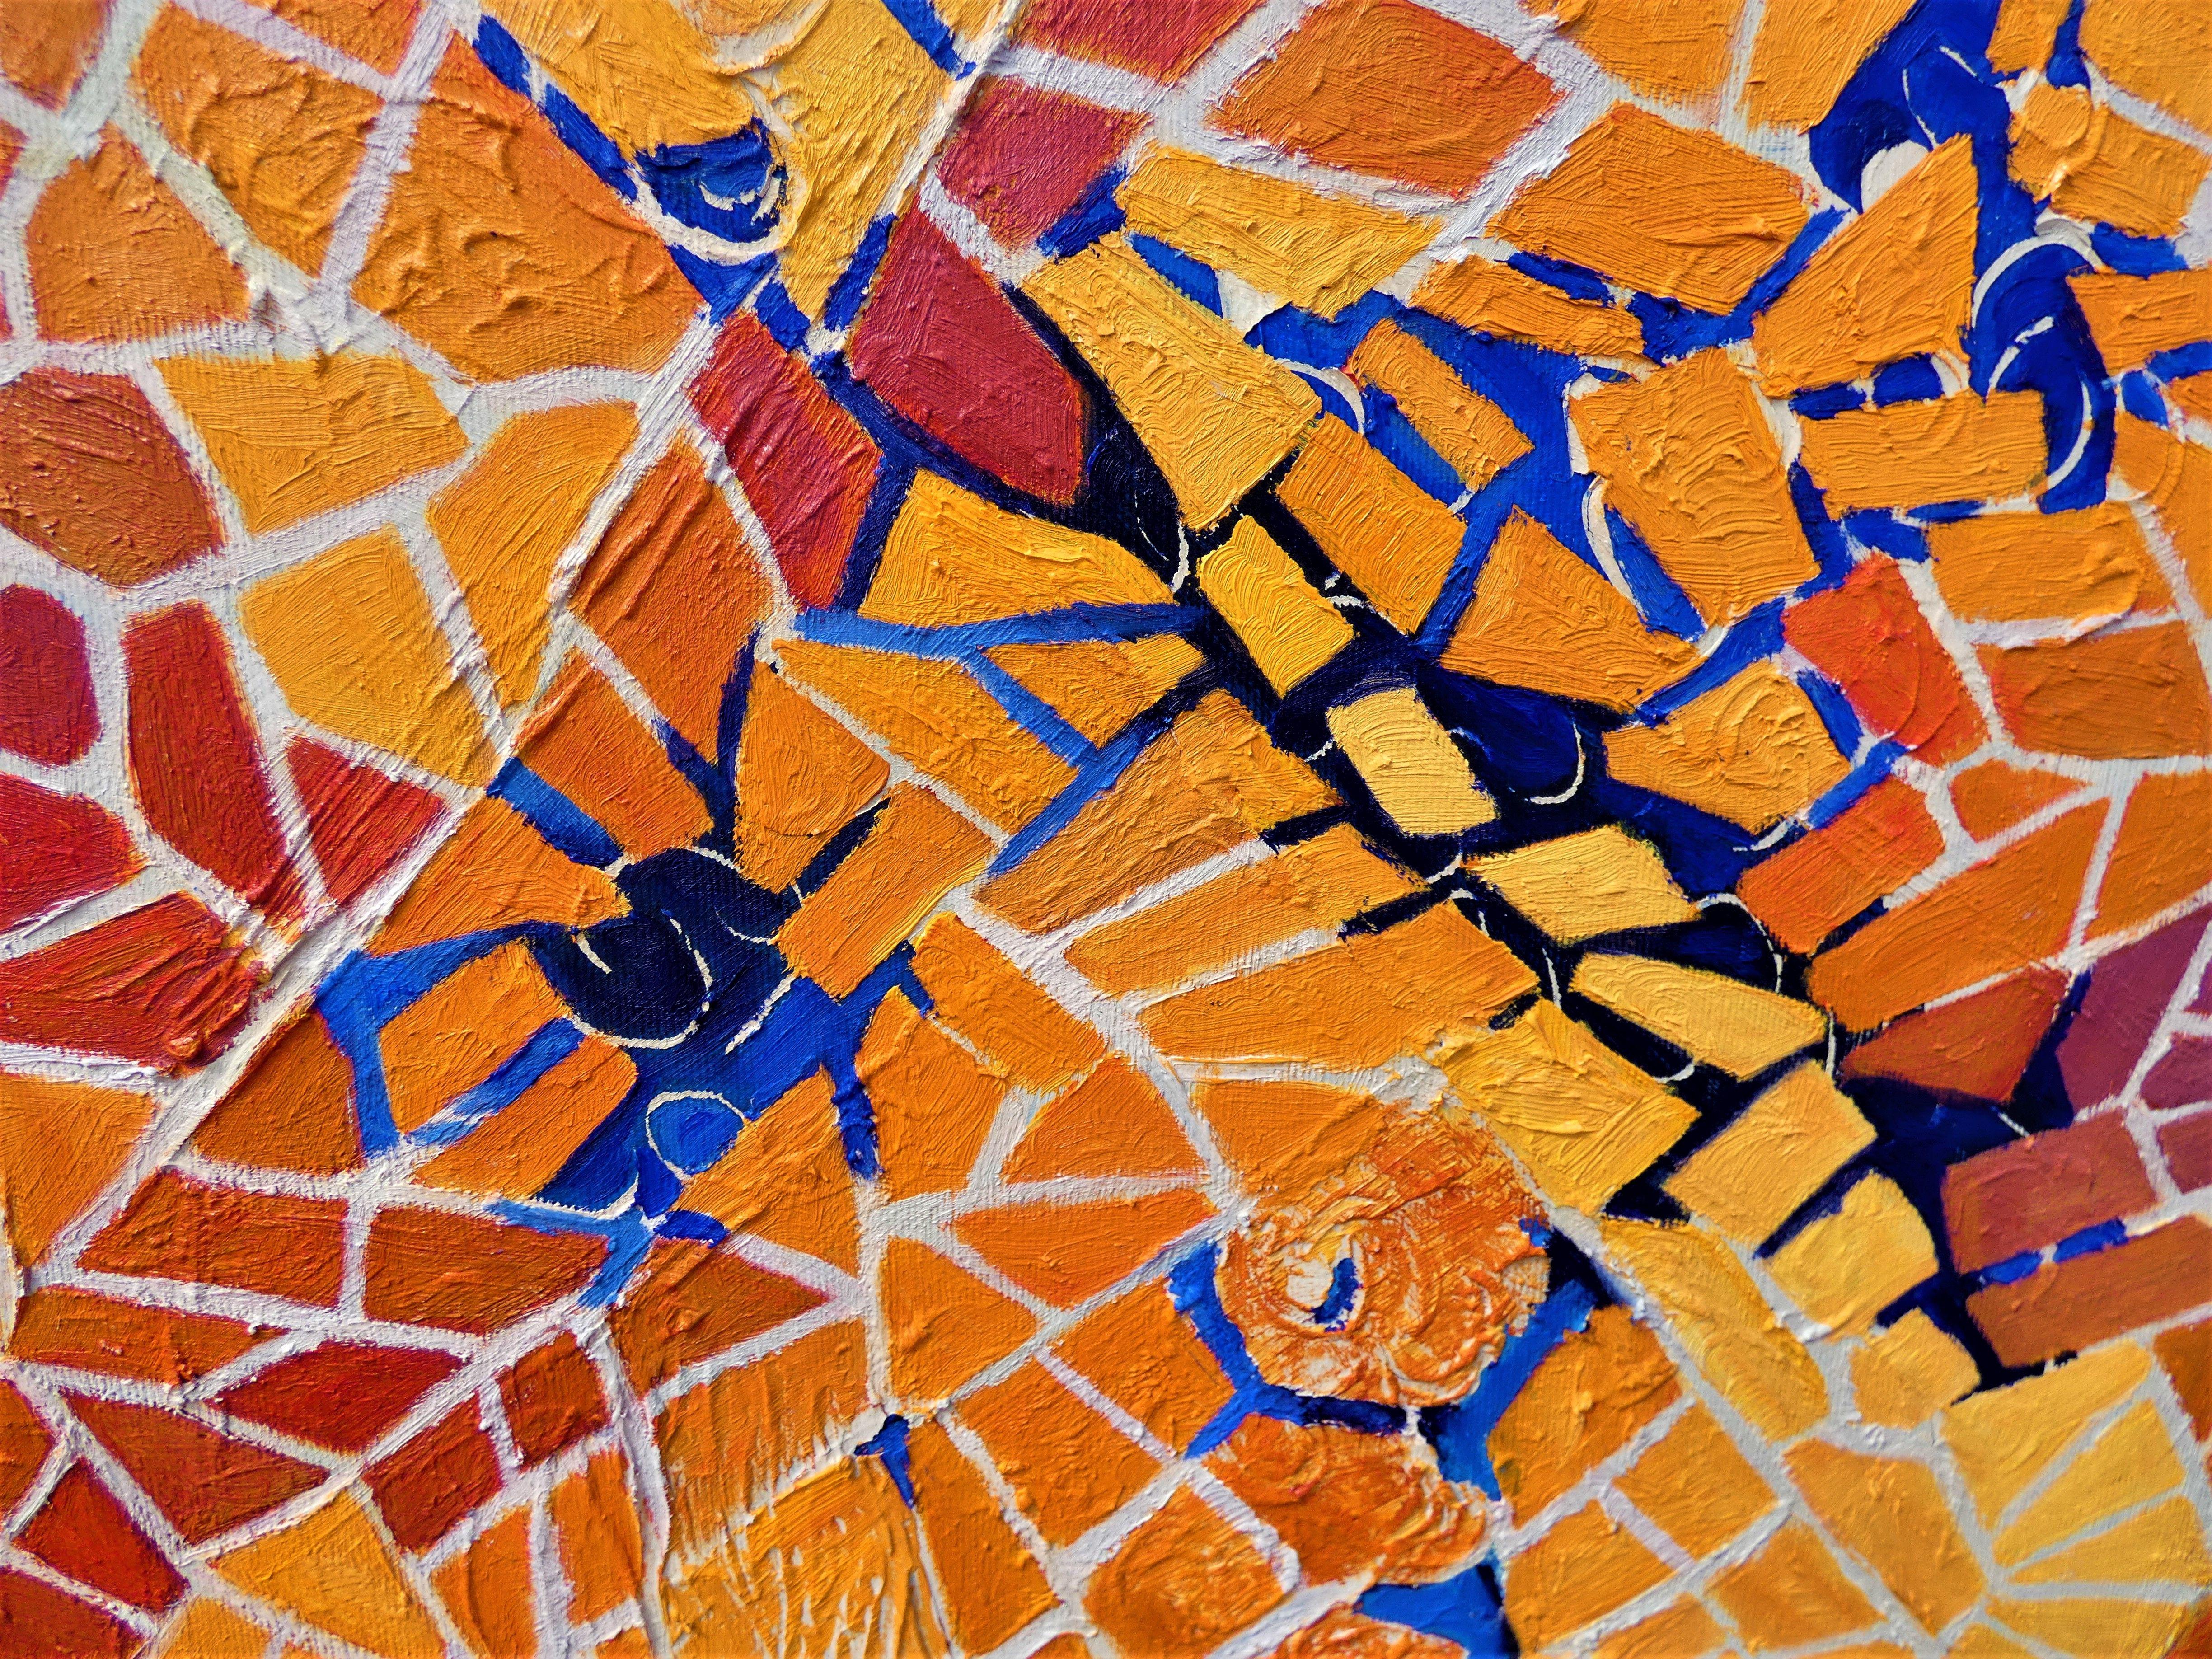 Fantasy II, Painting, Oil on Canvas - Orange Abstract Painting by Felicia Trales